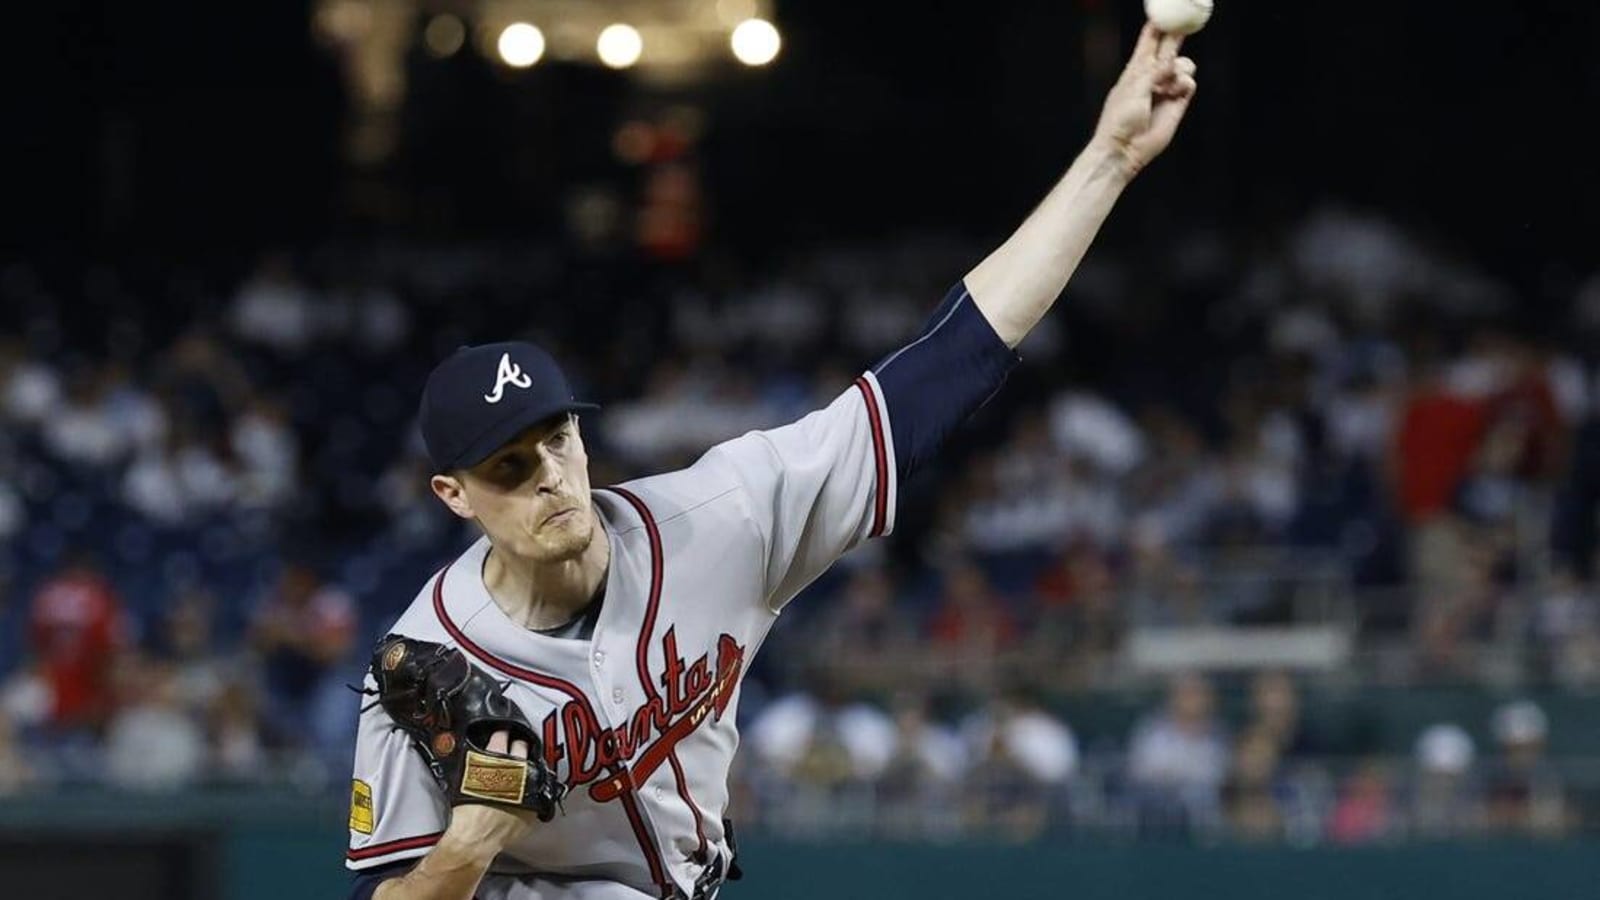 Deja vu? Braves try to prevent Phillies from taking 2-0 NLDS lead